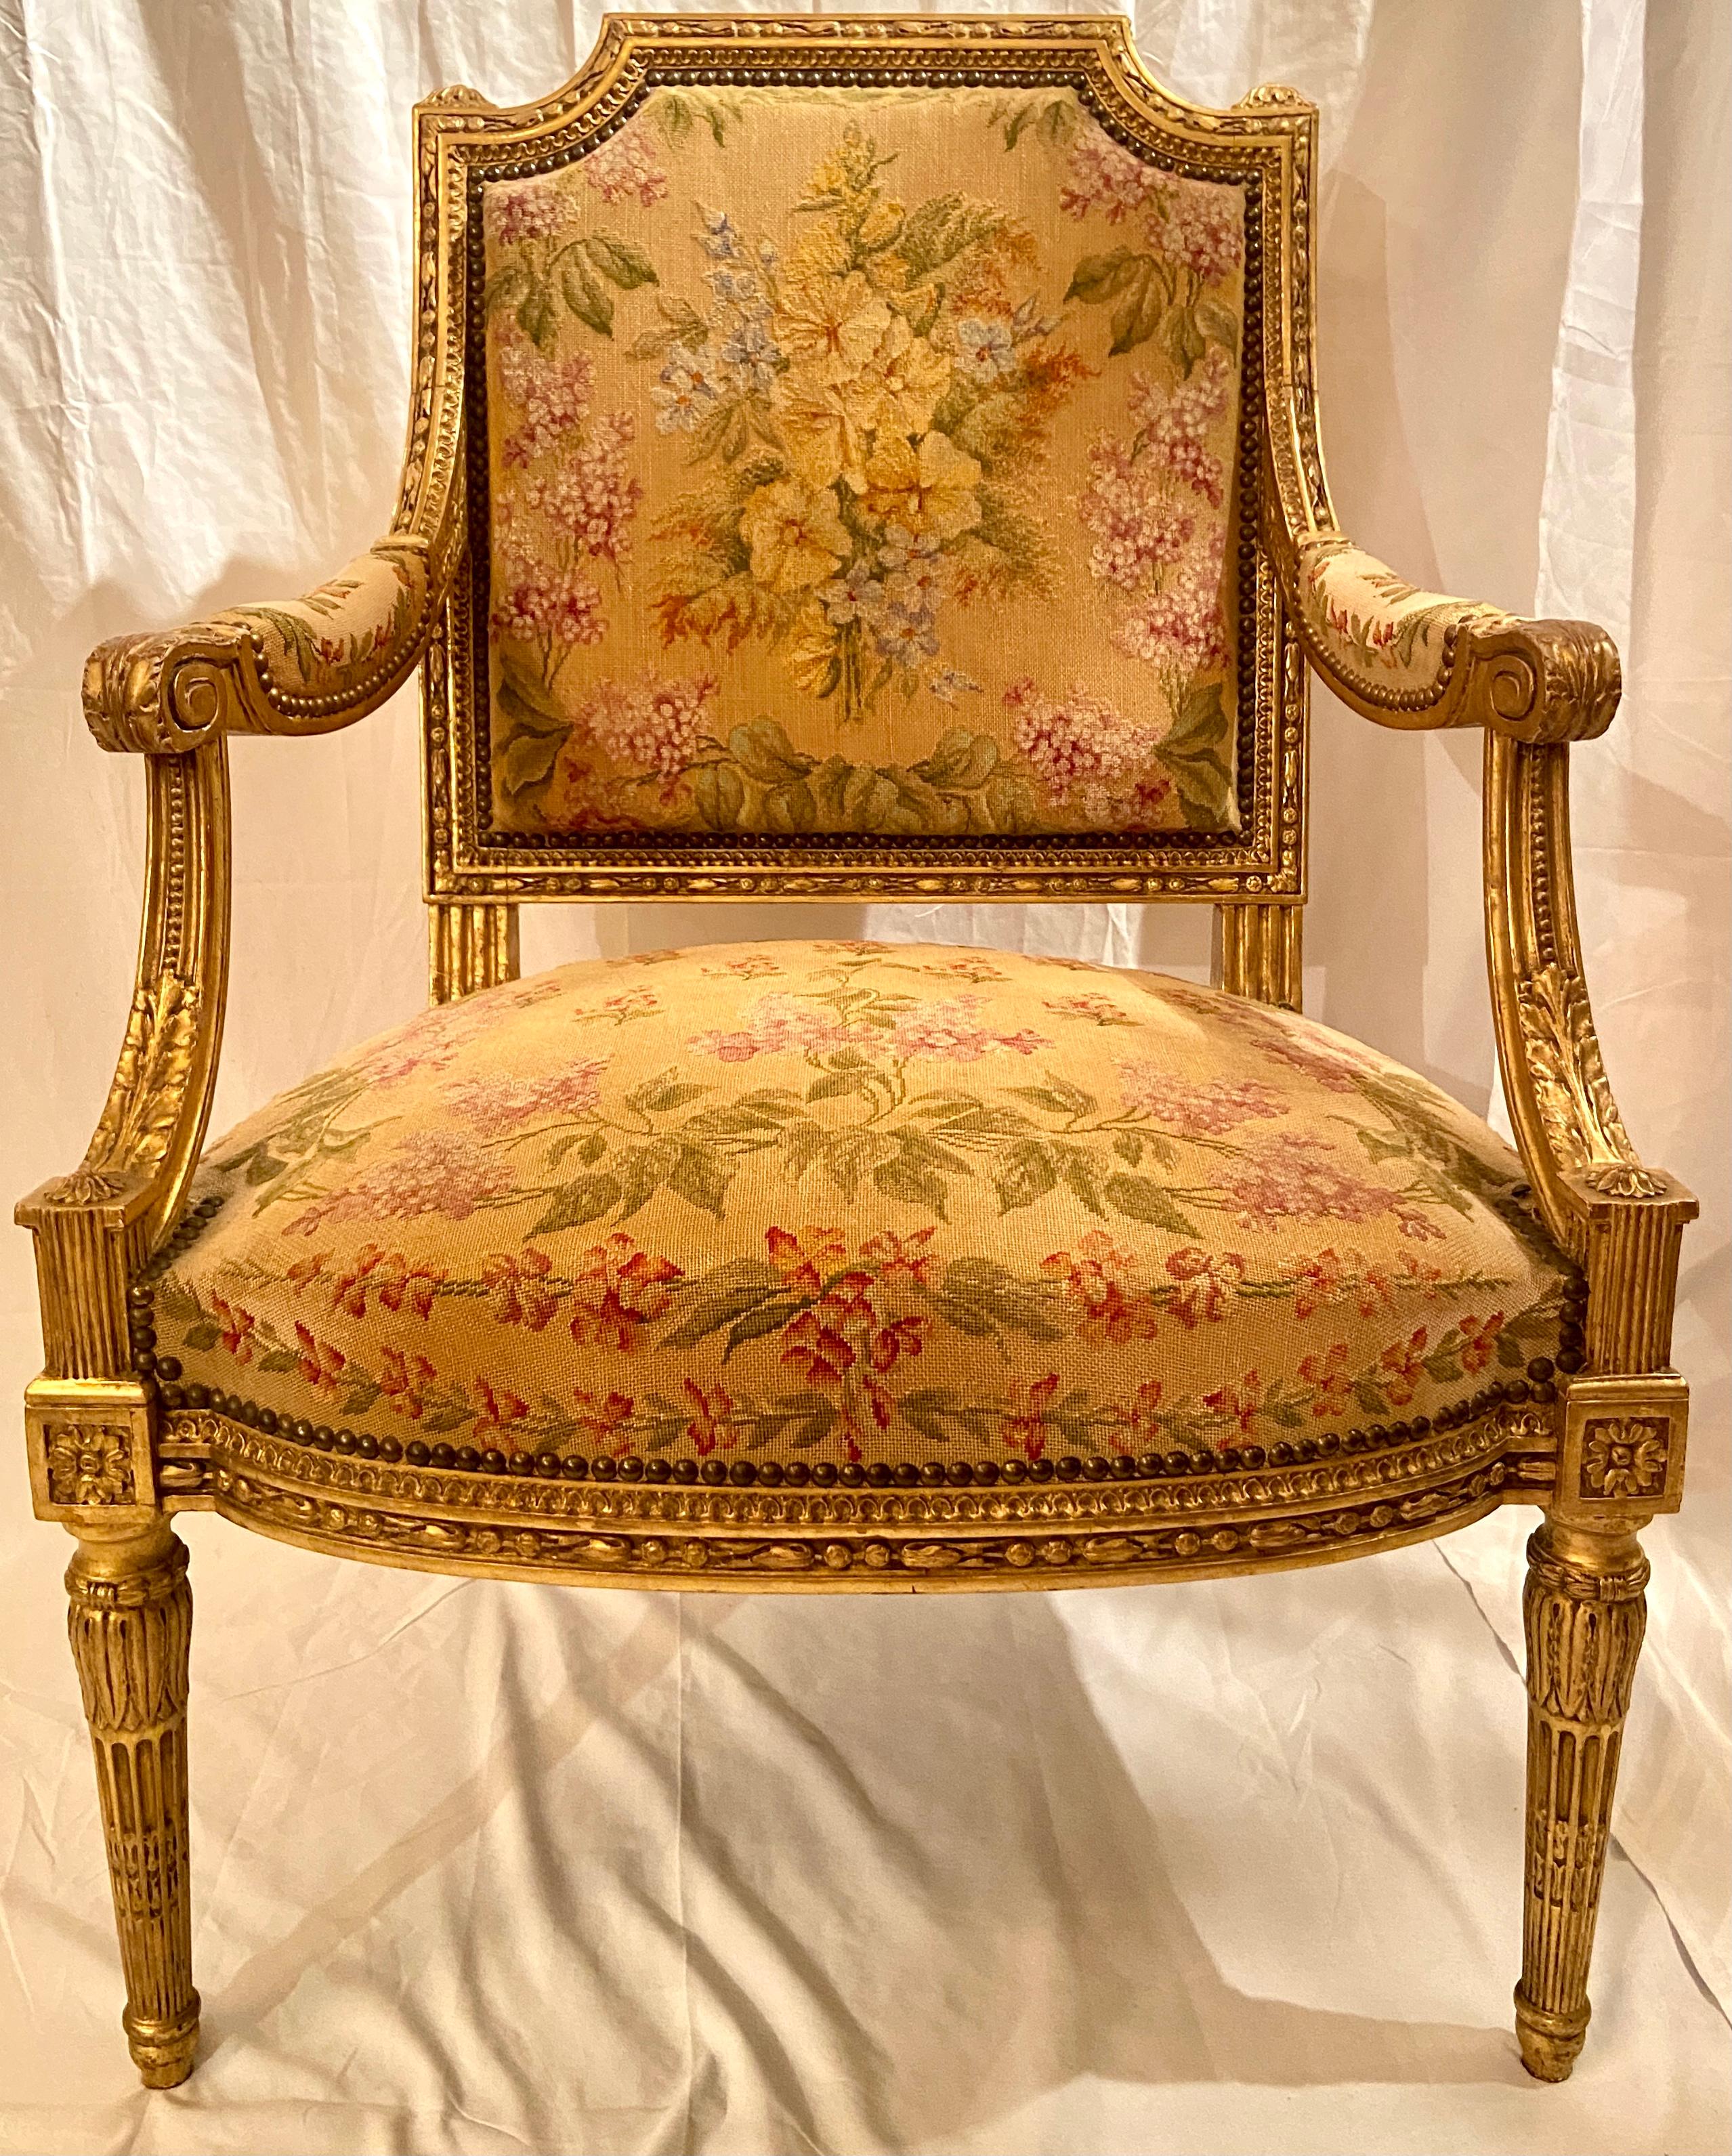 Pair antique French carved wood with gold leaf needlepoint armchairs, Circa 1880.
These armchairs are splendid and the needlepoint is in good condition. We have two pair of these chairs in our shop.